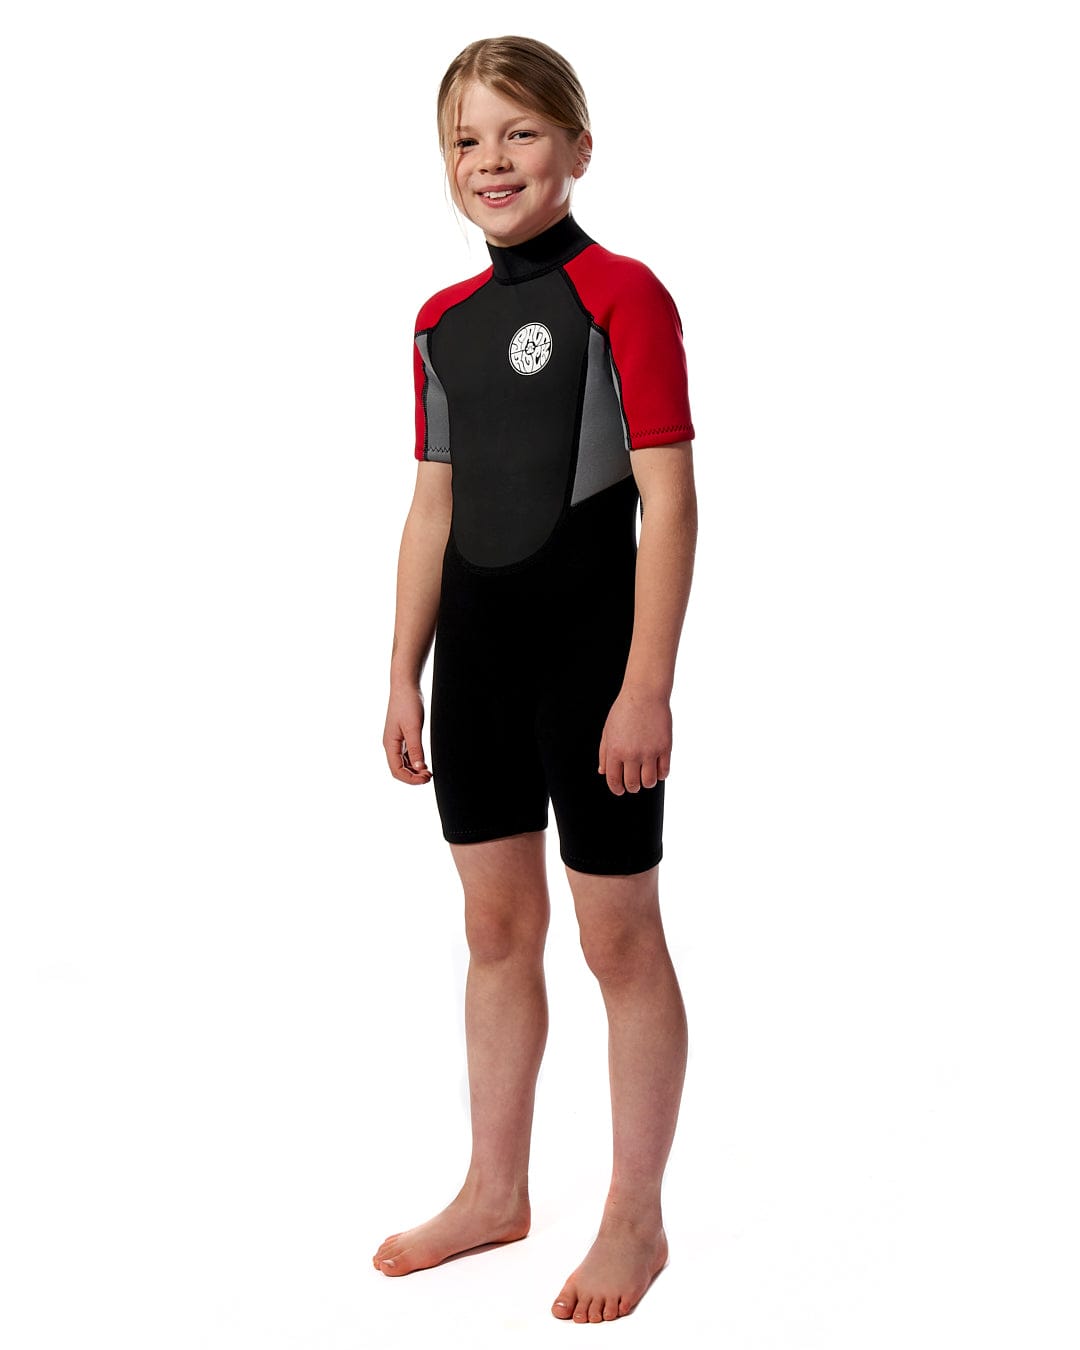 A young girl in a Saltrock Core - Boys 3/2 Shortie Wetsuit in Red stands in front of a white background, ready for beach days.